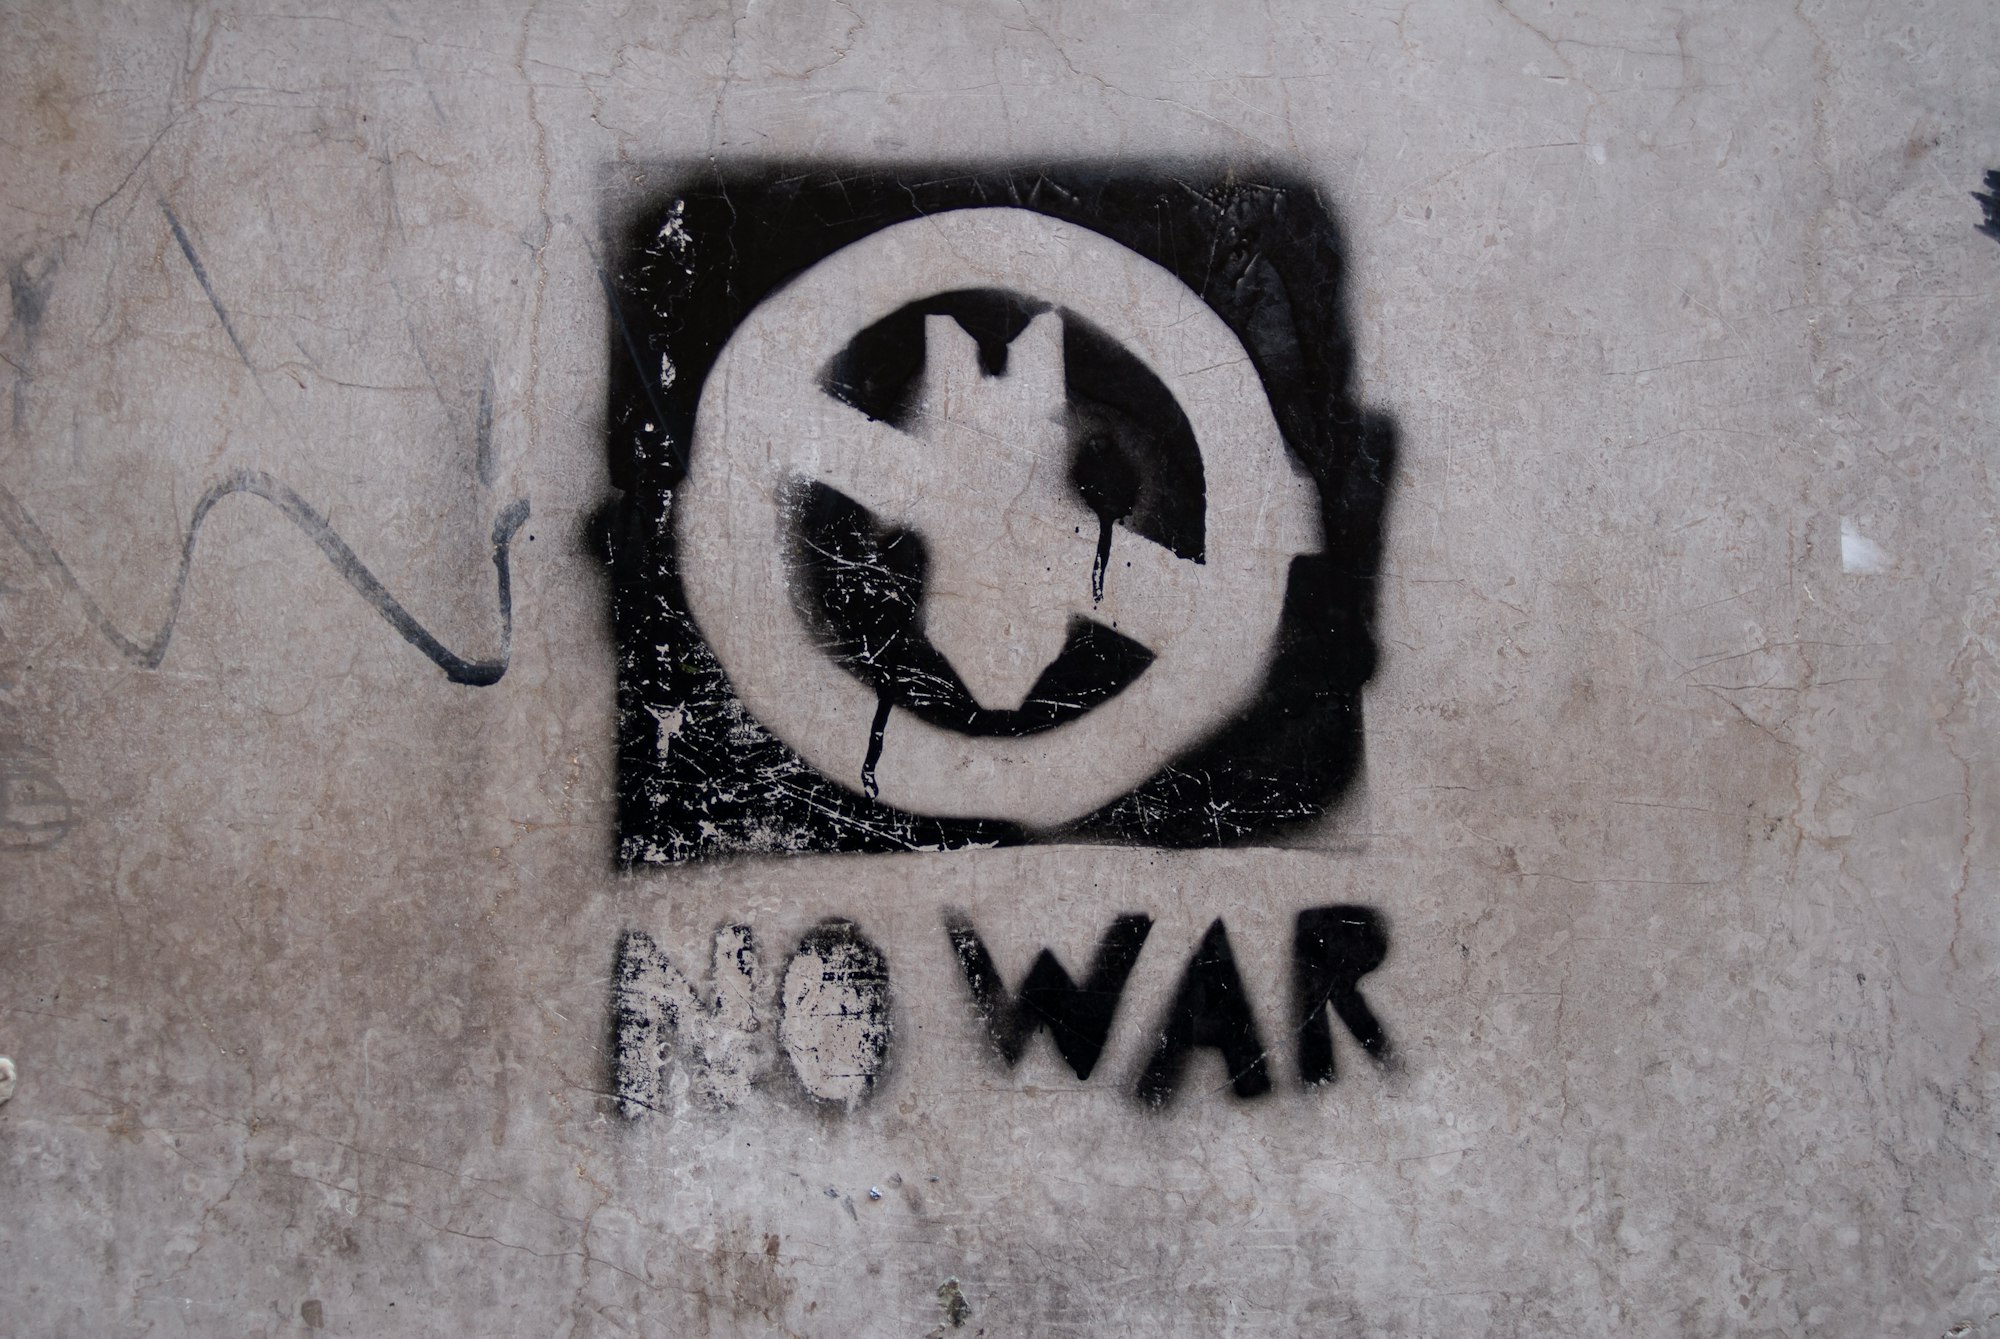 Stencil on the wall of the house.